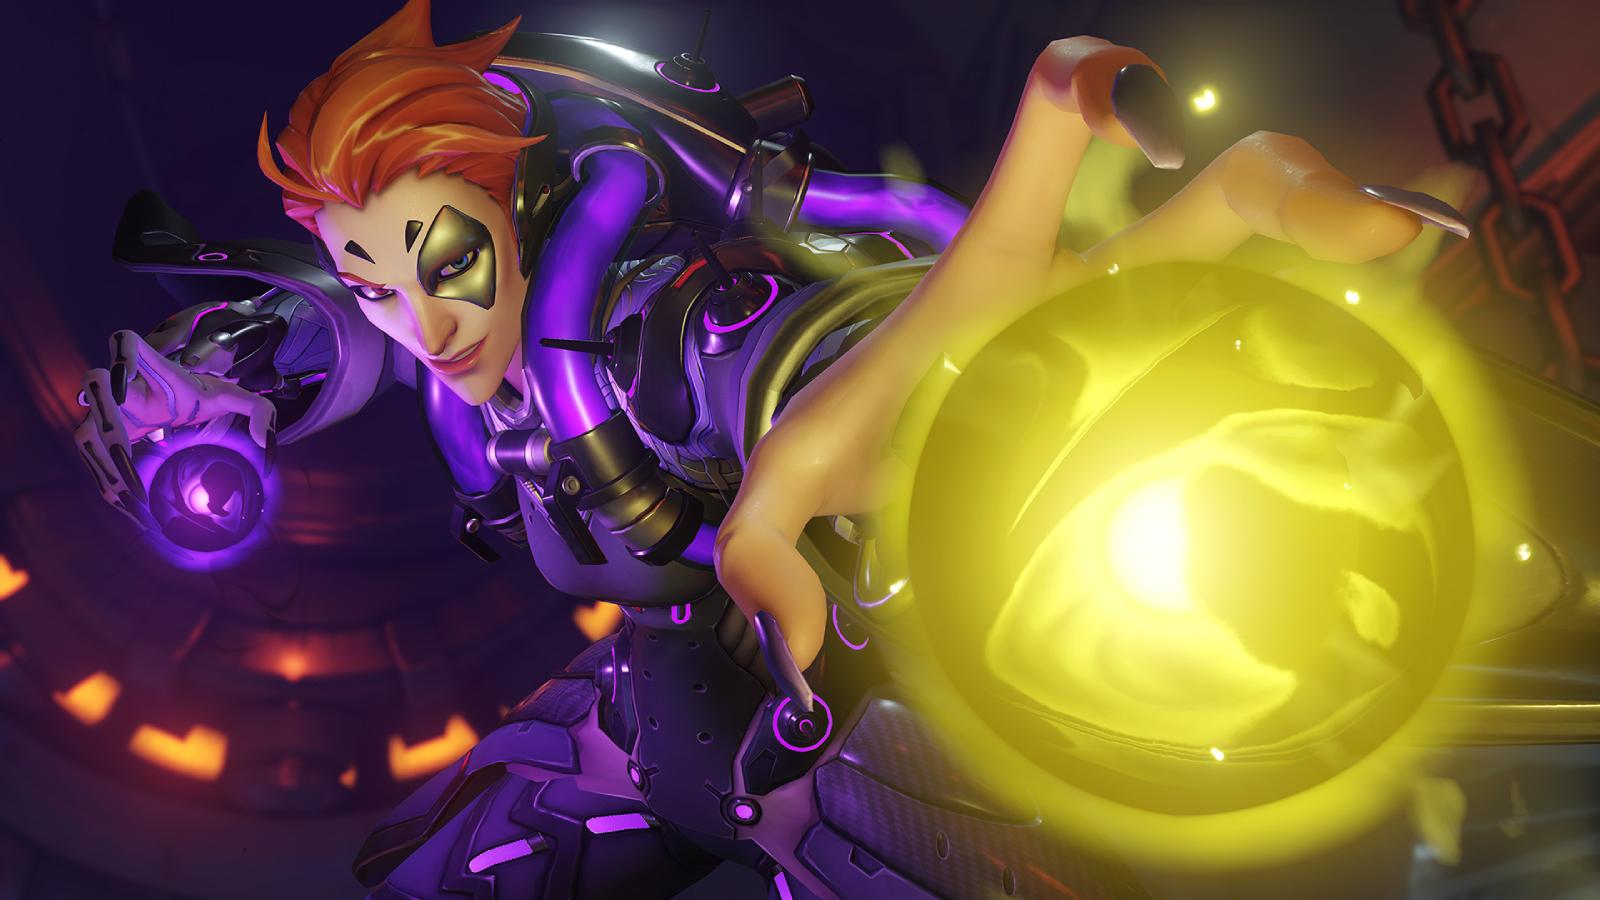 Moira in Overwatch 2 image